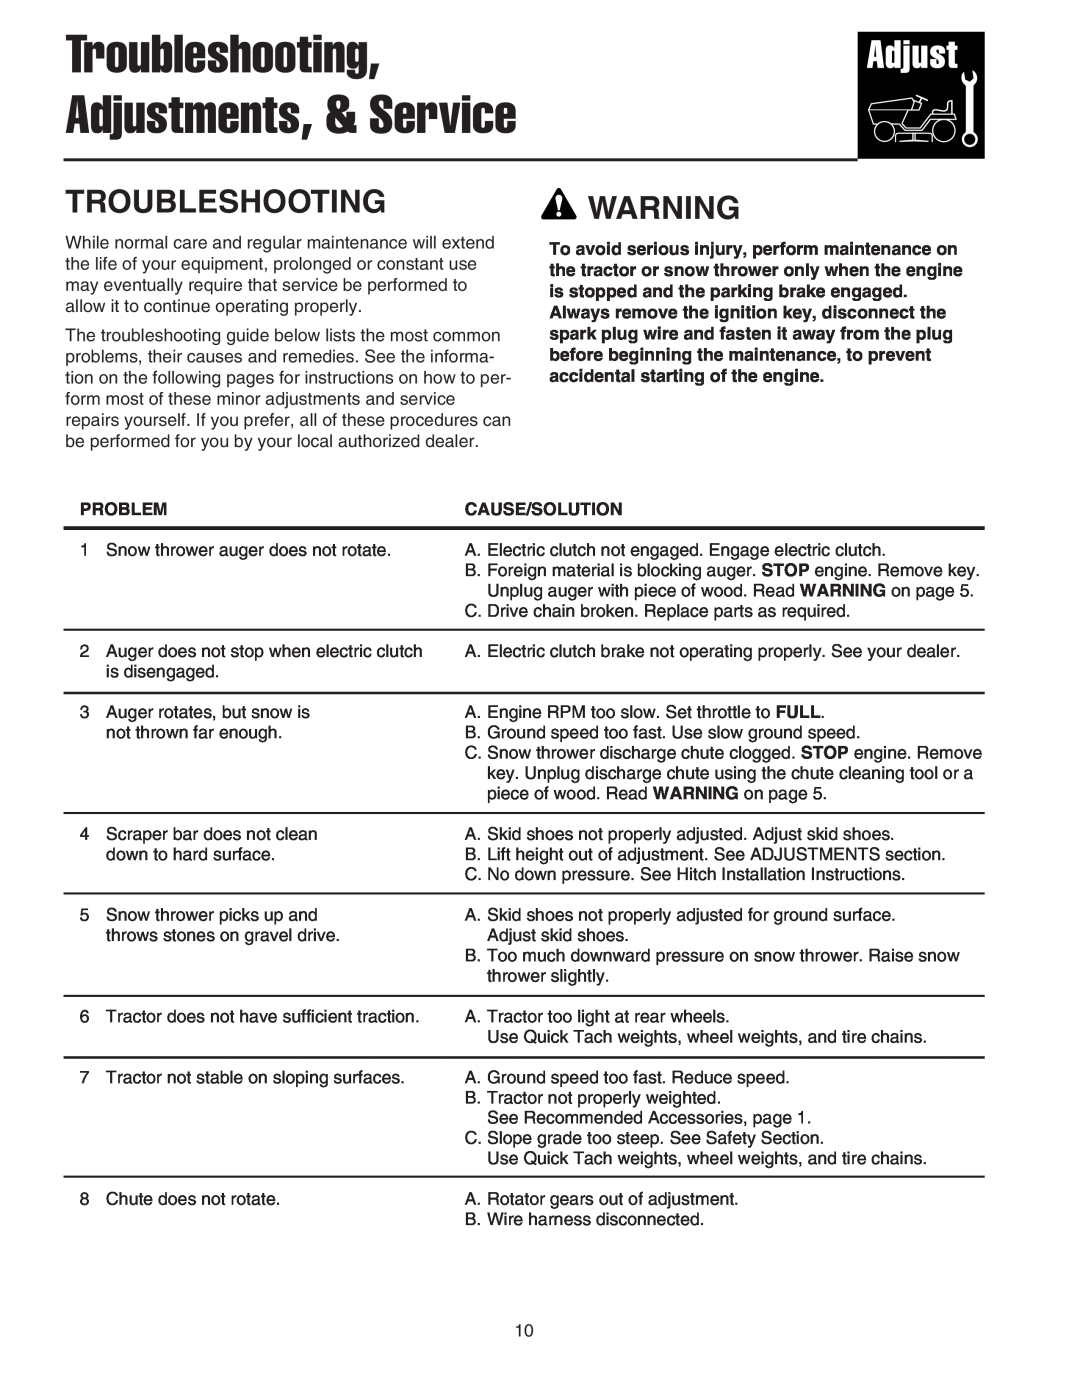 Snapper 42" Single-Stage Snowthrower manual Troubleshooting Adjustments, & Service, Troubleshooting Warning, Problem 